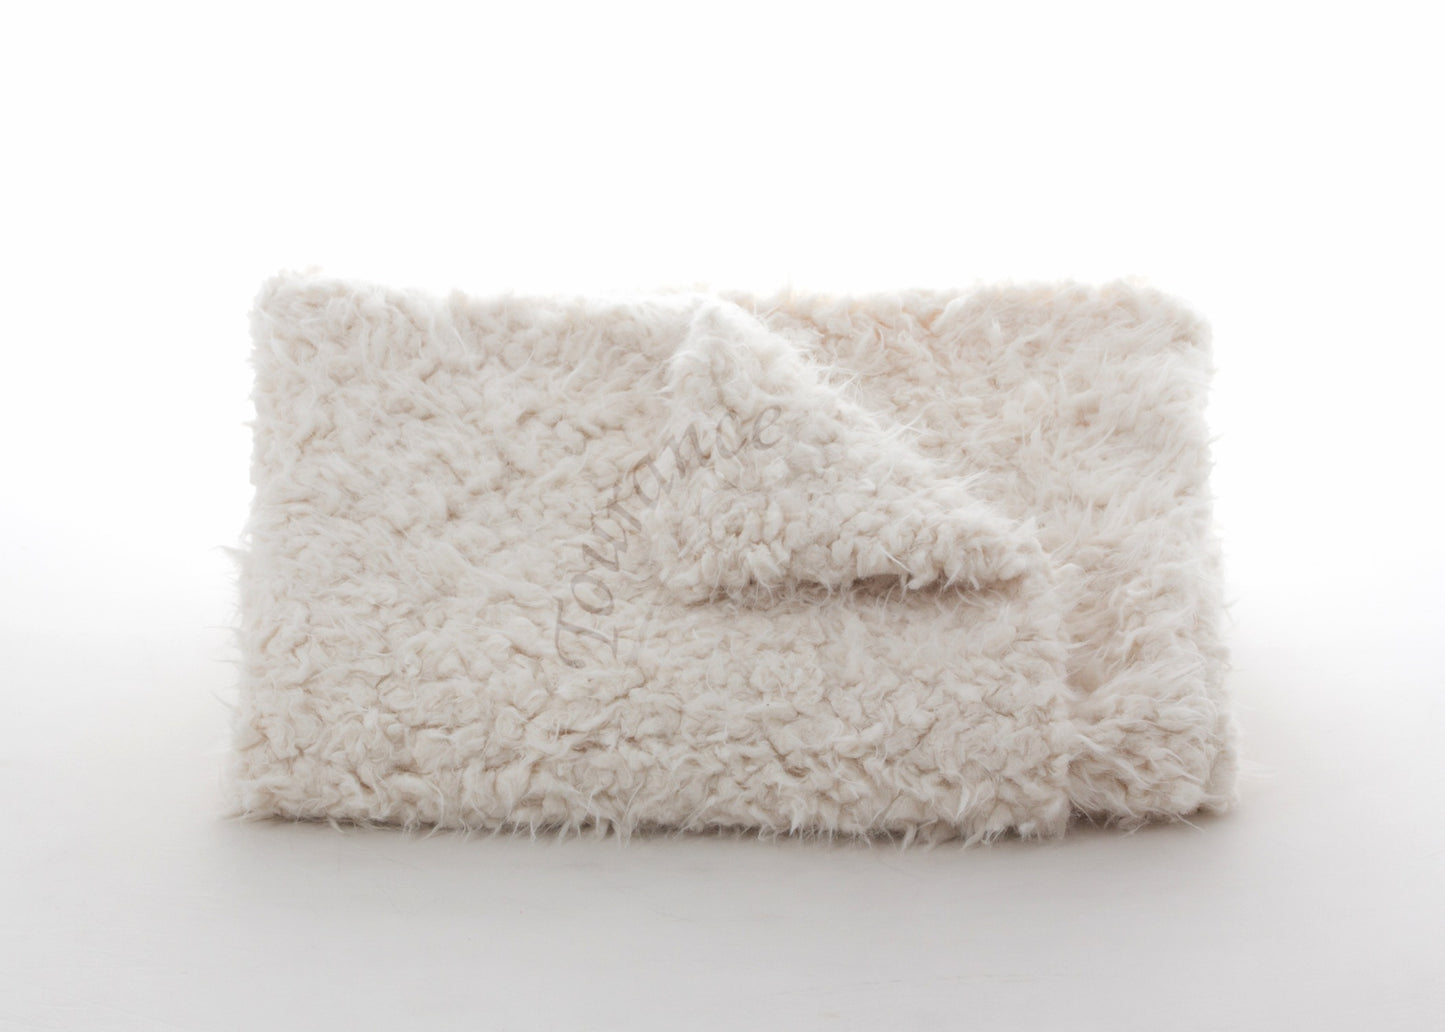 Lamb’s Wool Baby Blanket in Ivory with tourance watermark